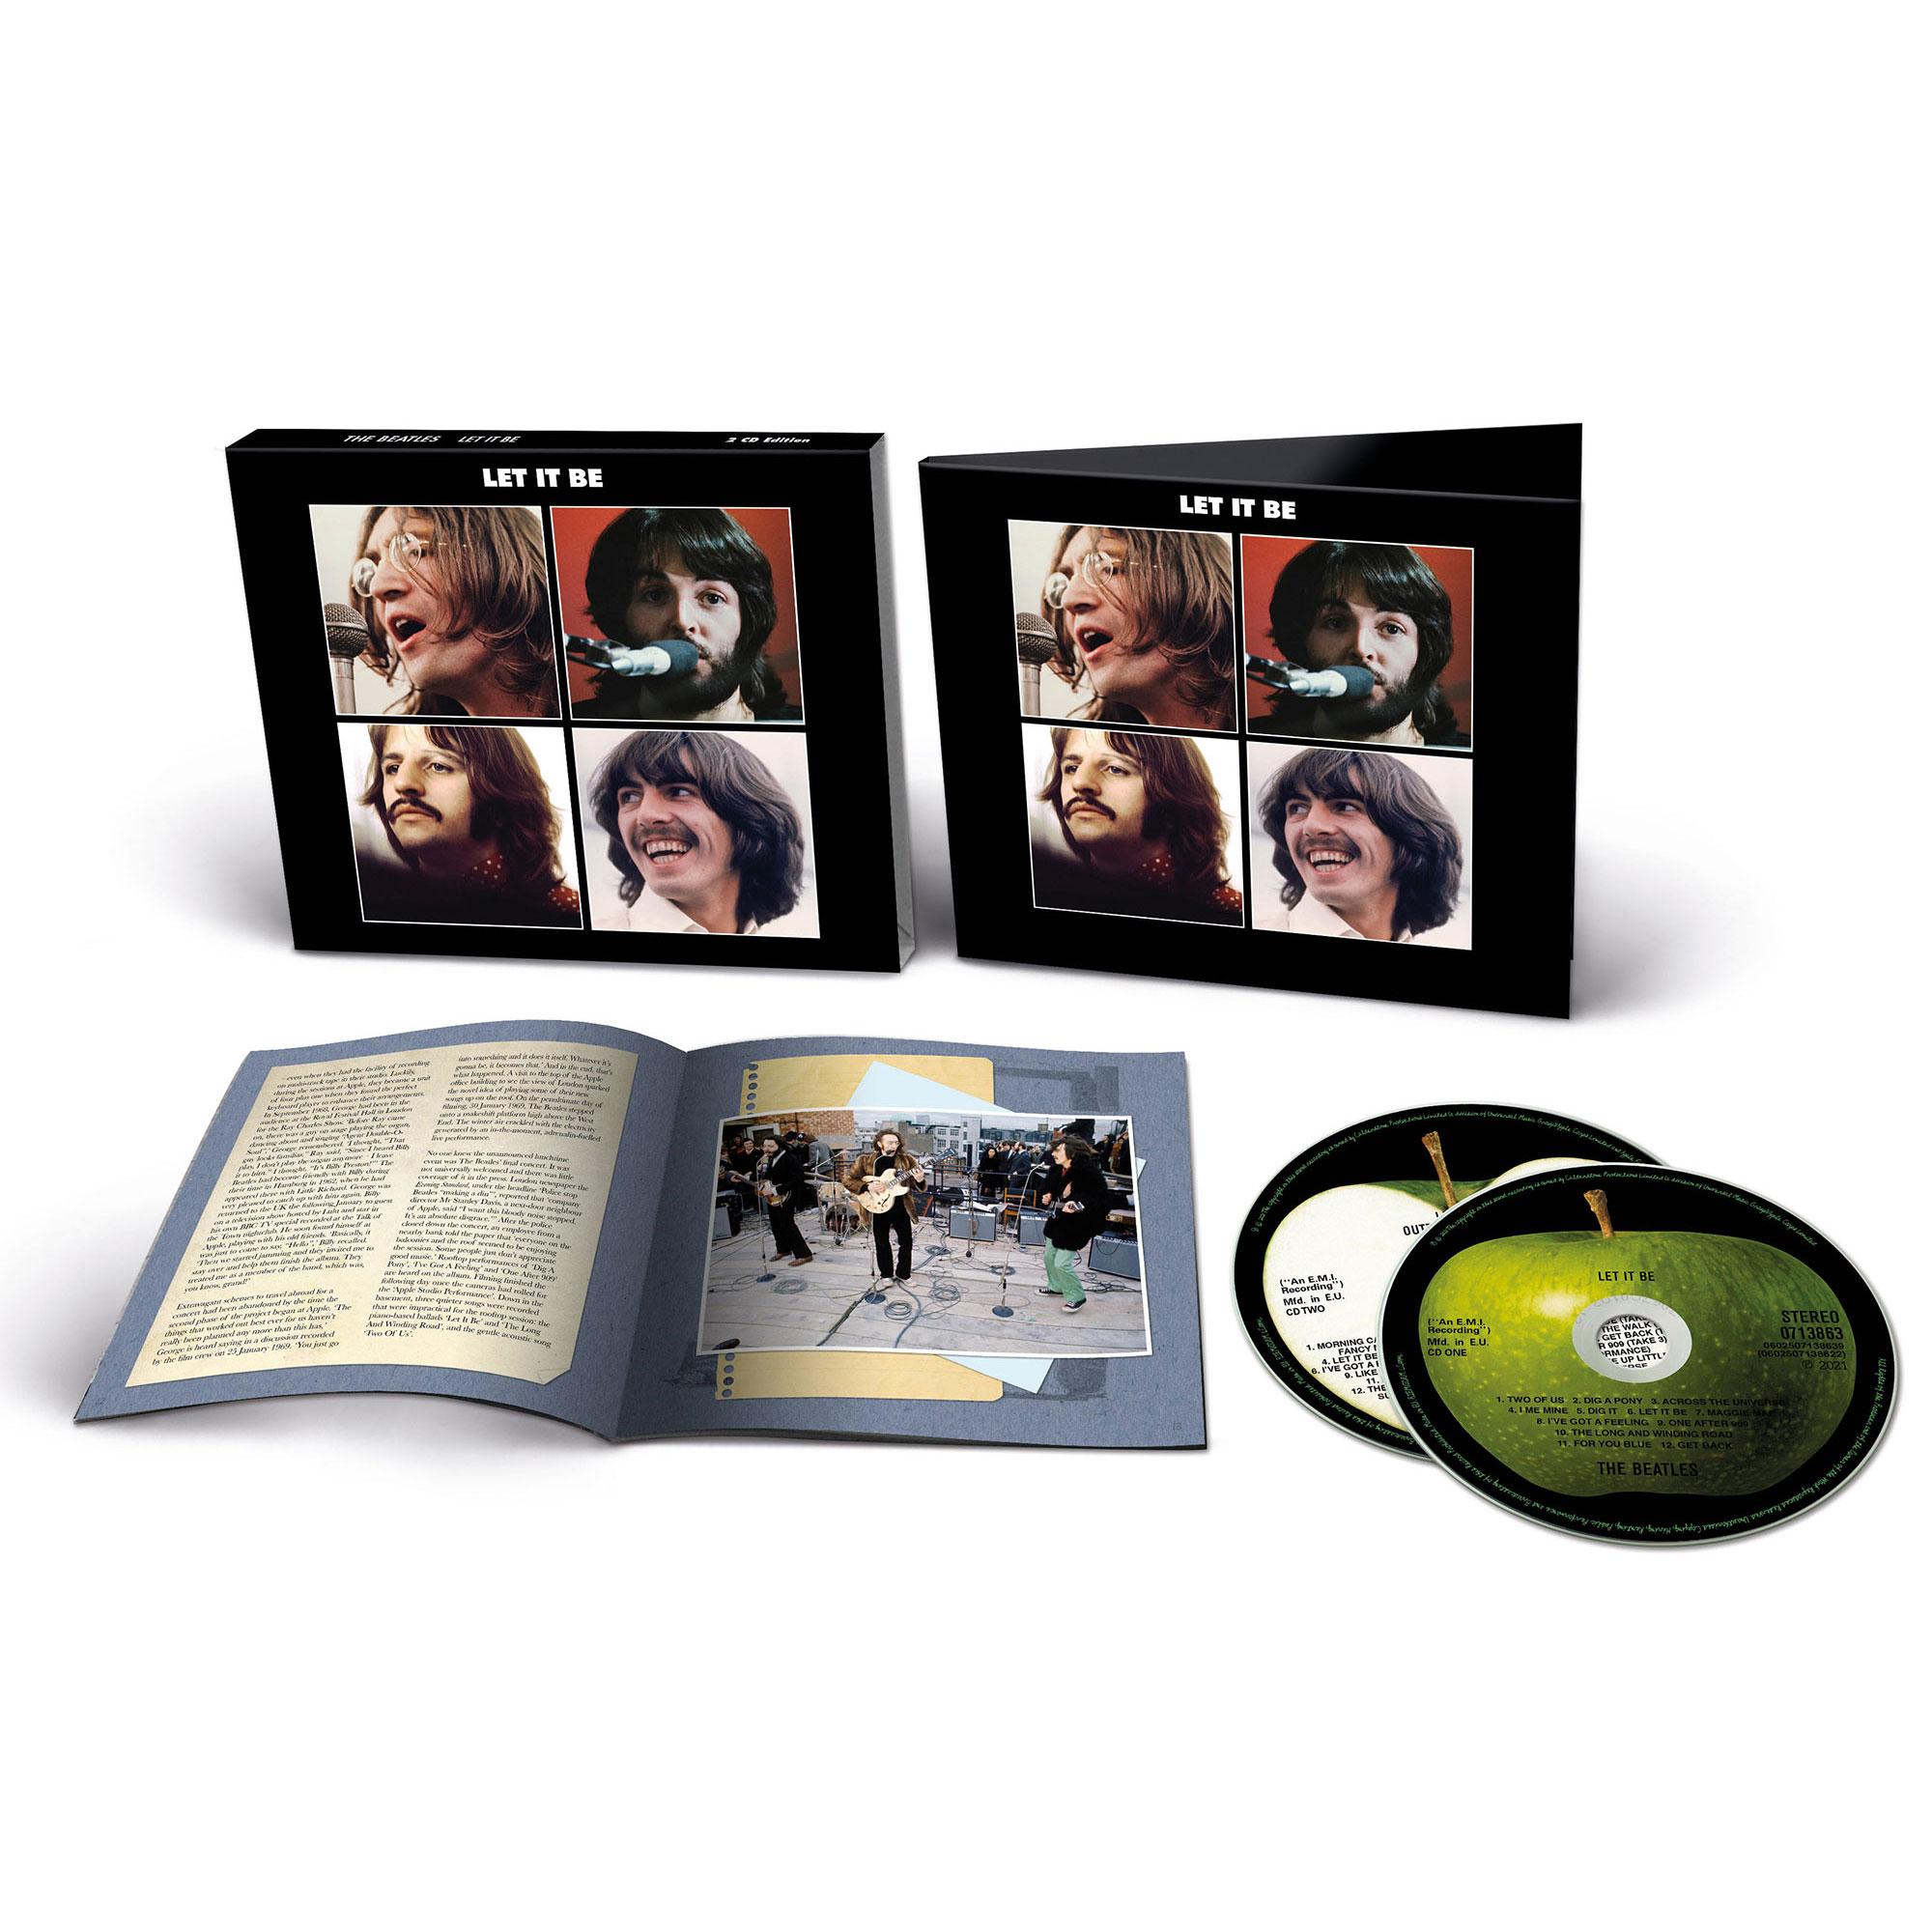 THE BEATLES GET BACK TO LET IT BE WITH SPECIAL EDITION RELEASES